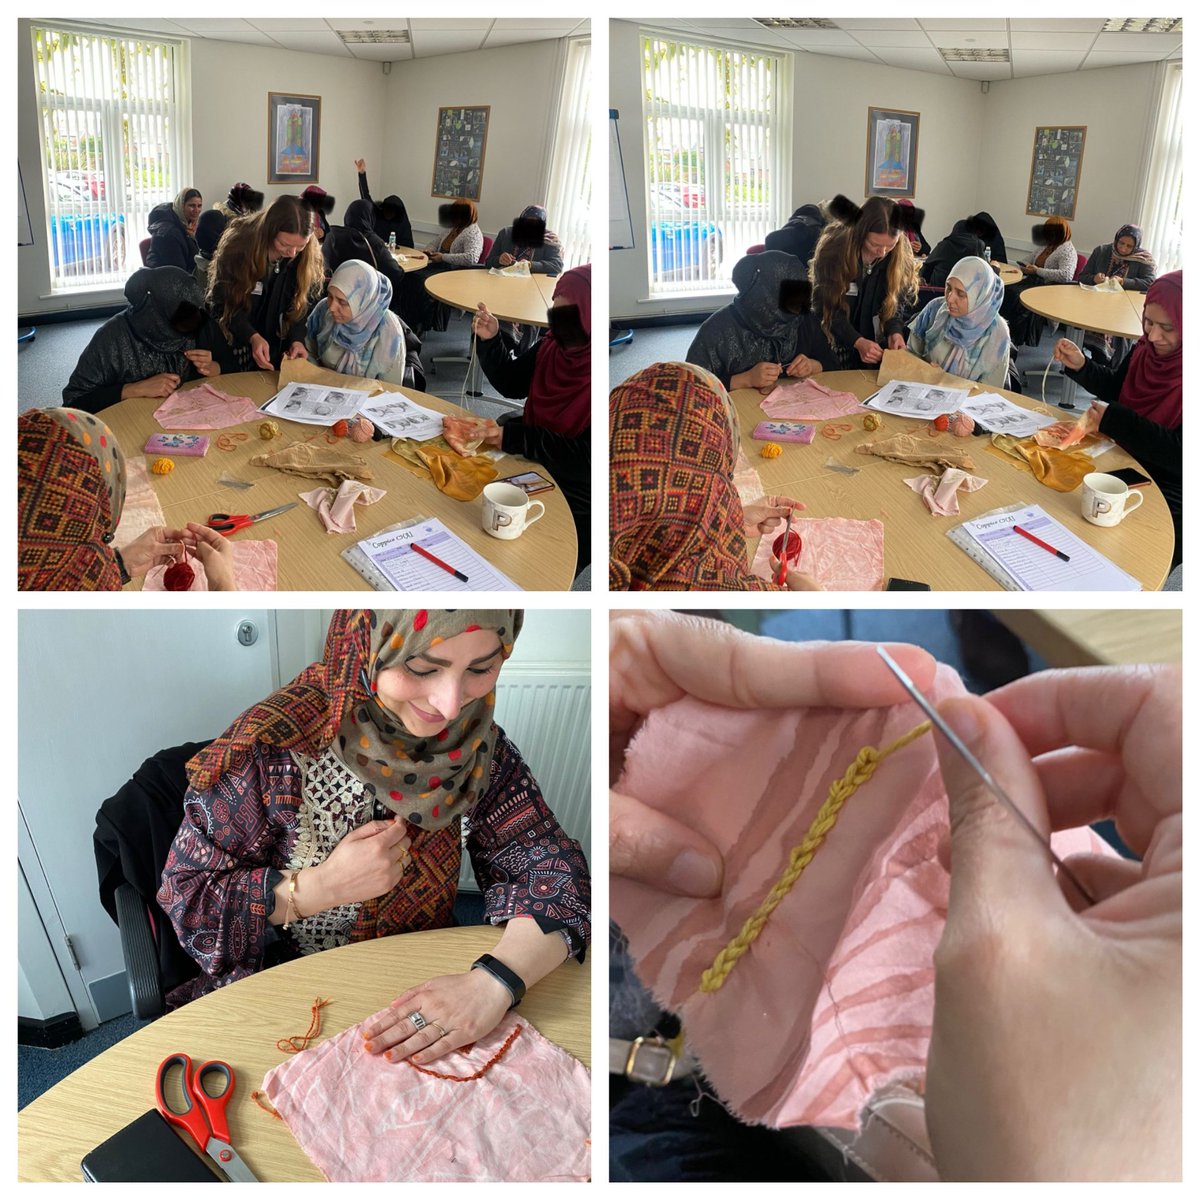 Fantastic workshops @Coppiceprimary CHAI with the amazing @cabasacarnival team. The mums are learning all about #naturalDyeing, #Batik, #embriodery and #Shibori, gaining fantastic new Skills.